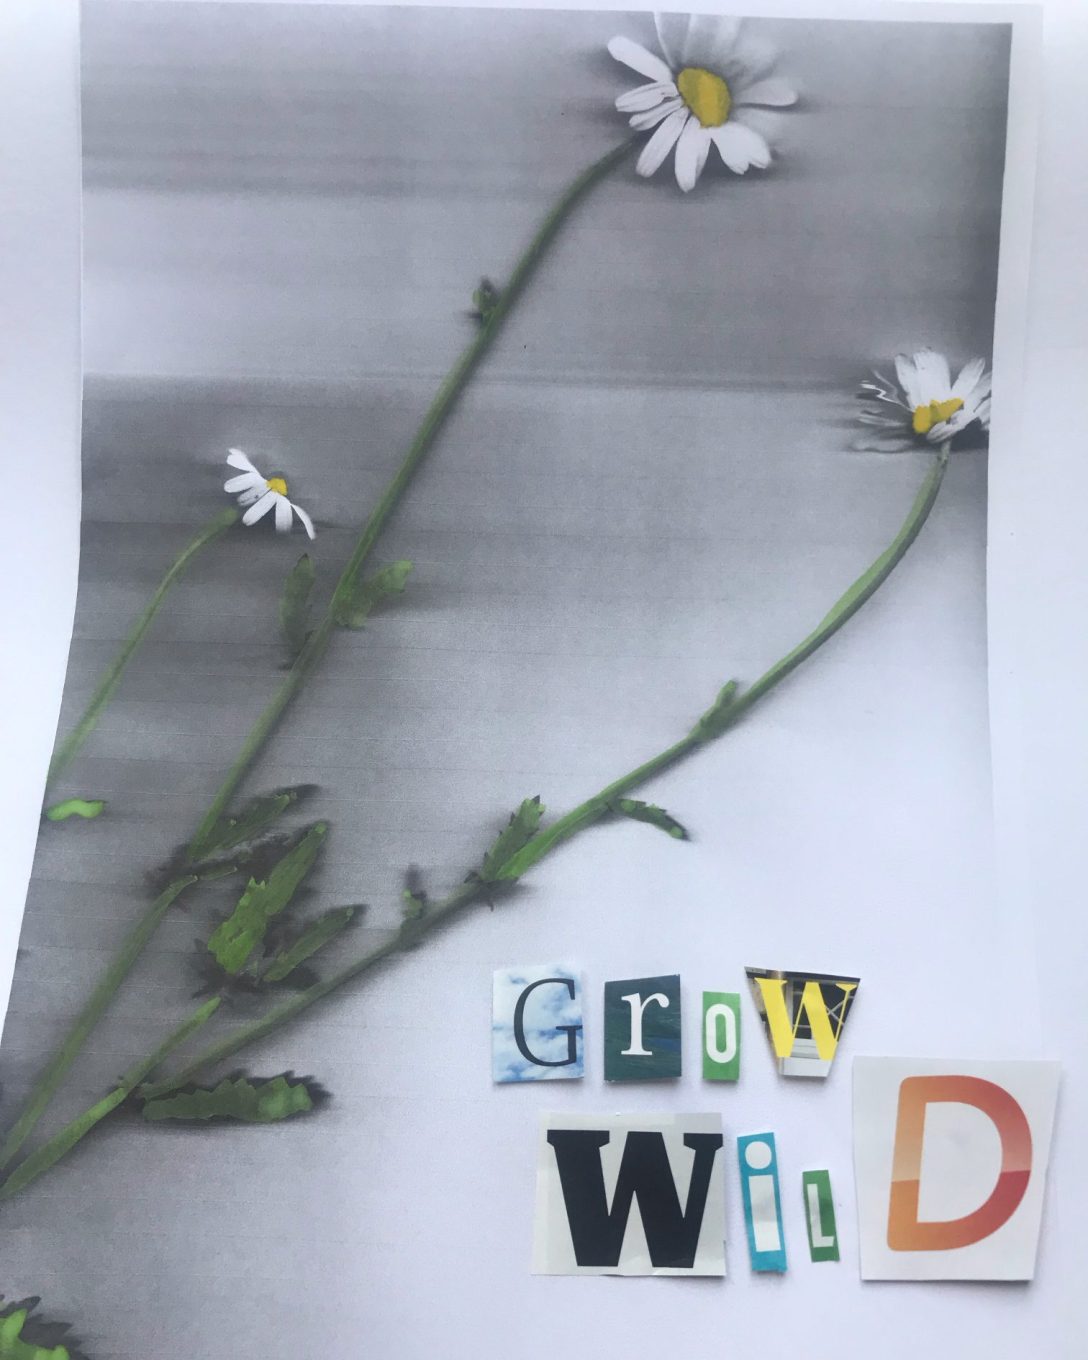 The image is of oxeye daisies photocopied and painted by Josephine Corcoran, with the words 'Grow Wild' added